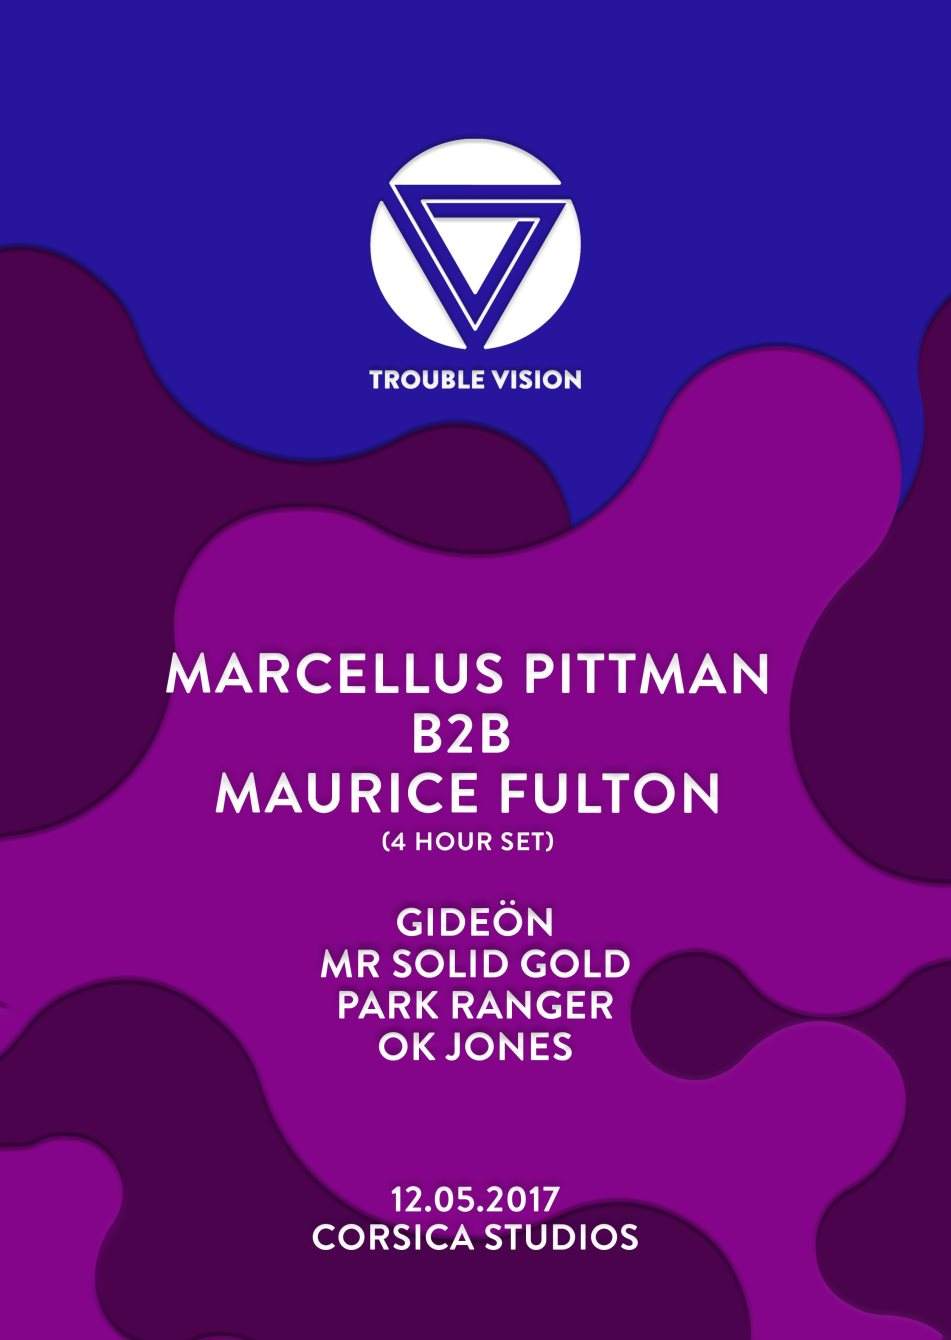 Trouble Vision with Marcellus Pittman b2b Maurice Fulton - フライヤー表